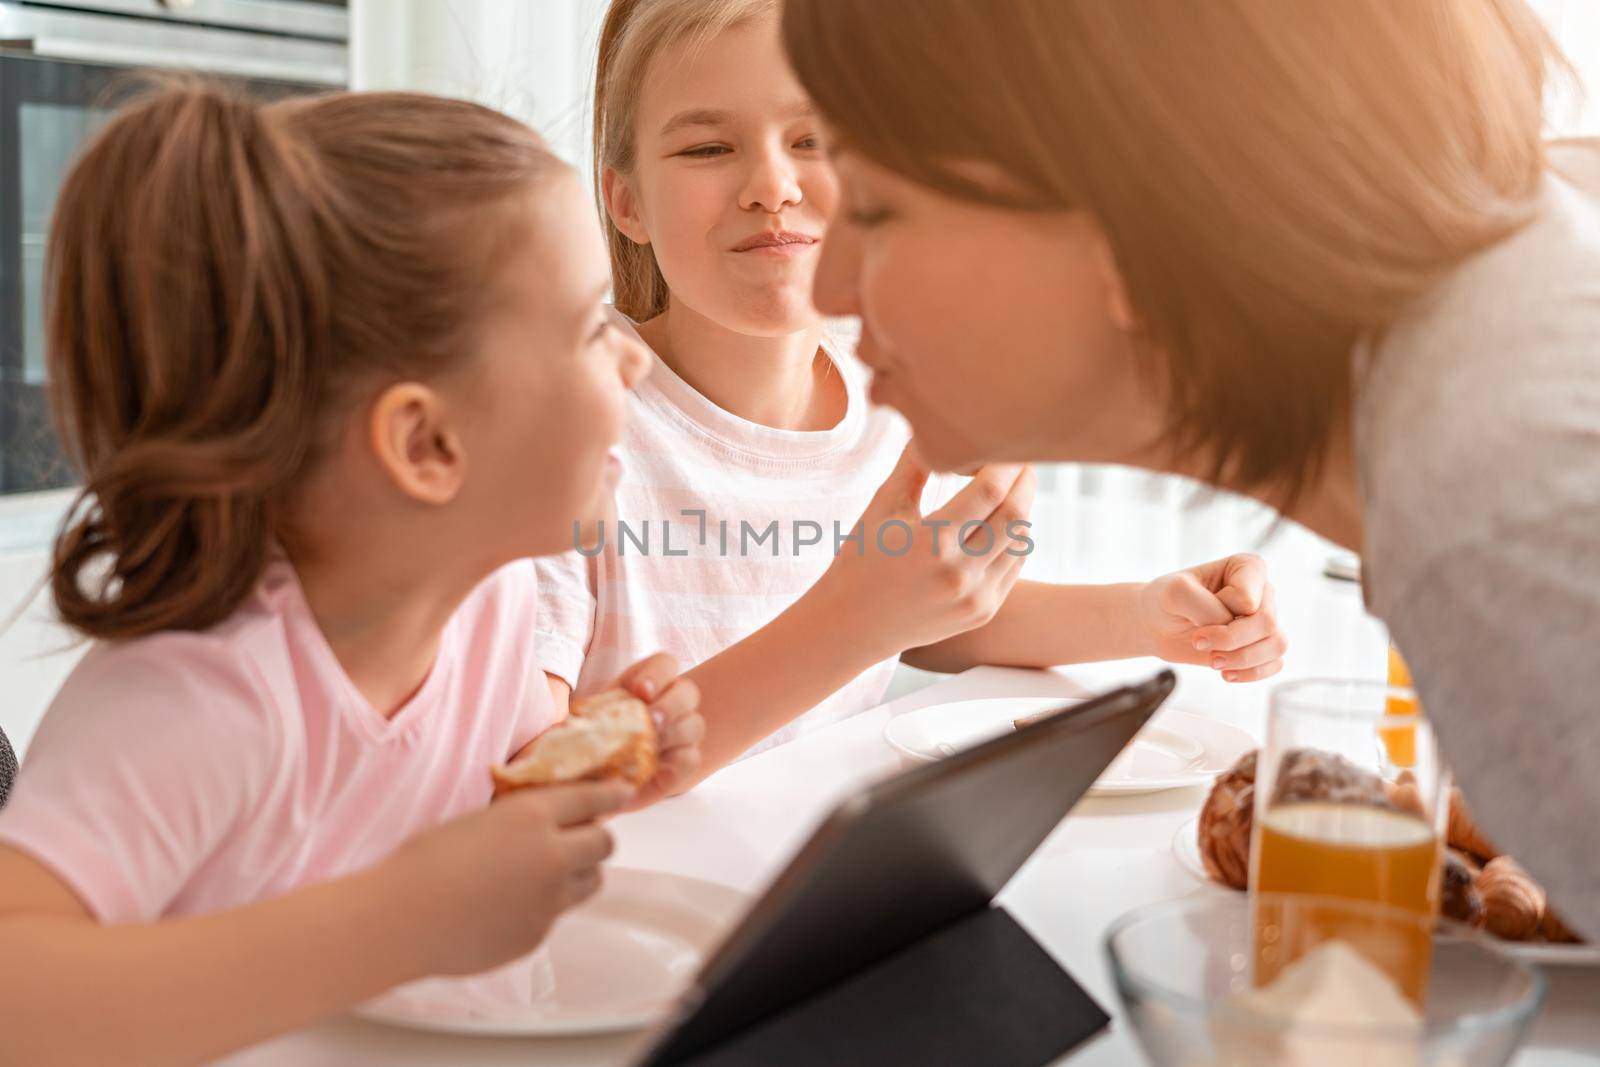 Mother trying to kiss daughter while having breakfast together with two kids by Mariakray